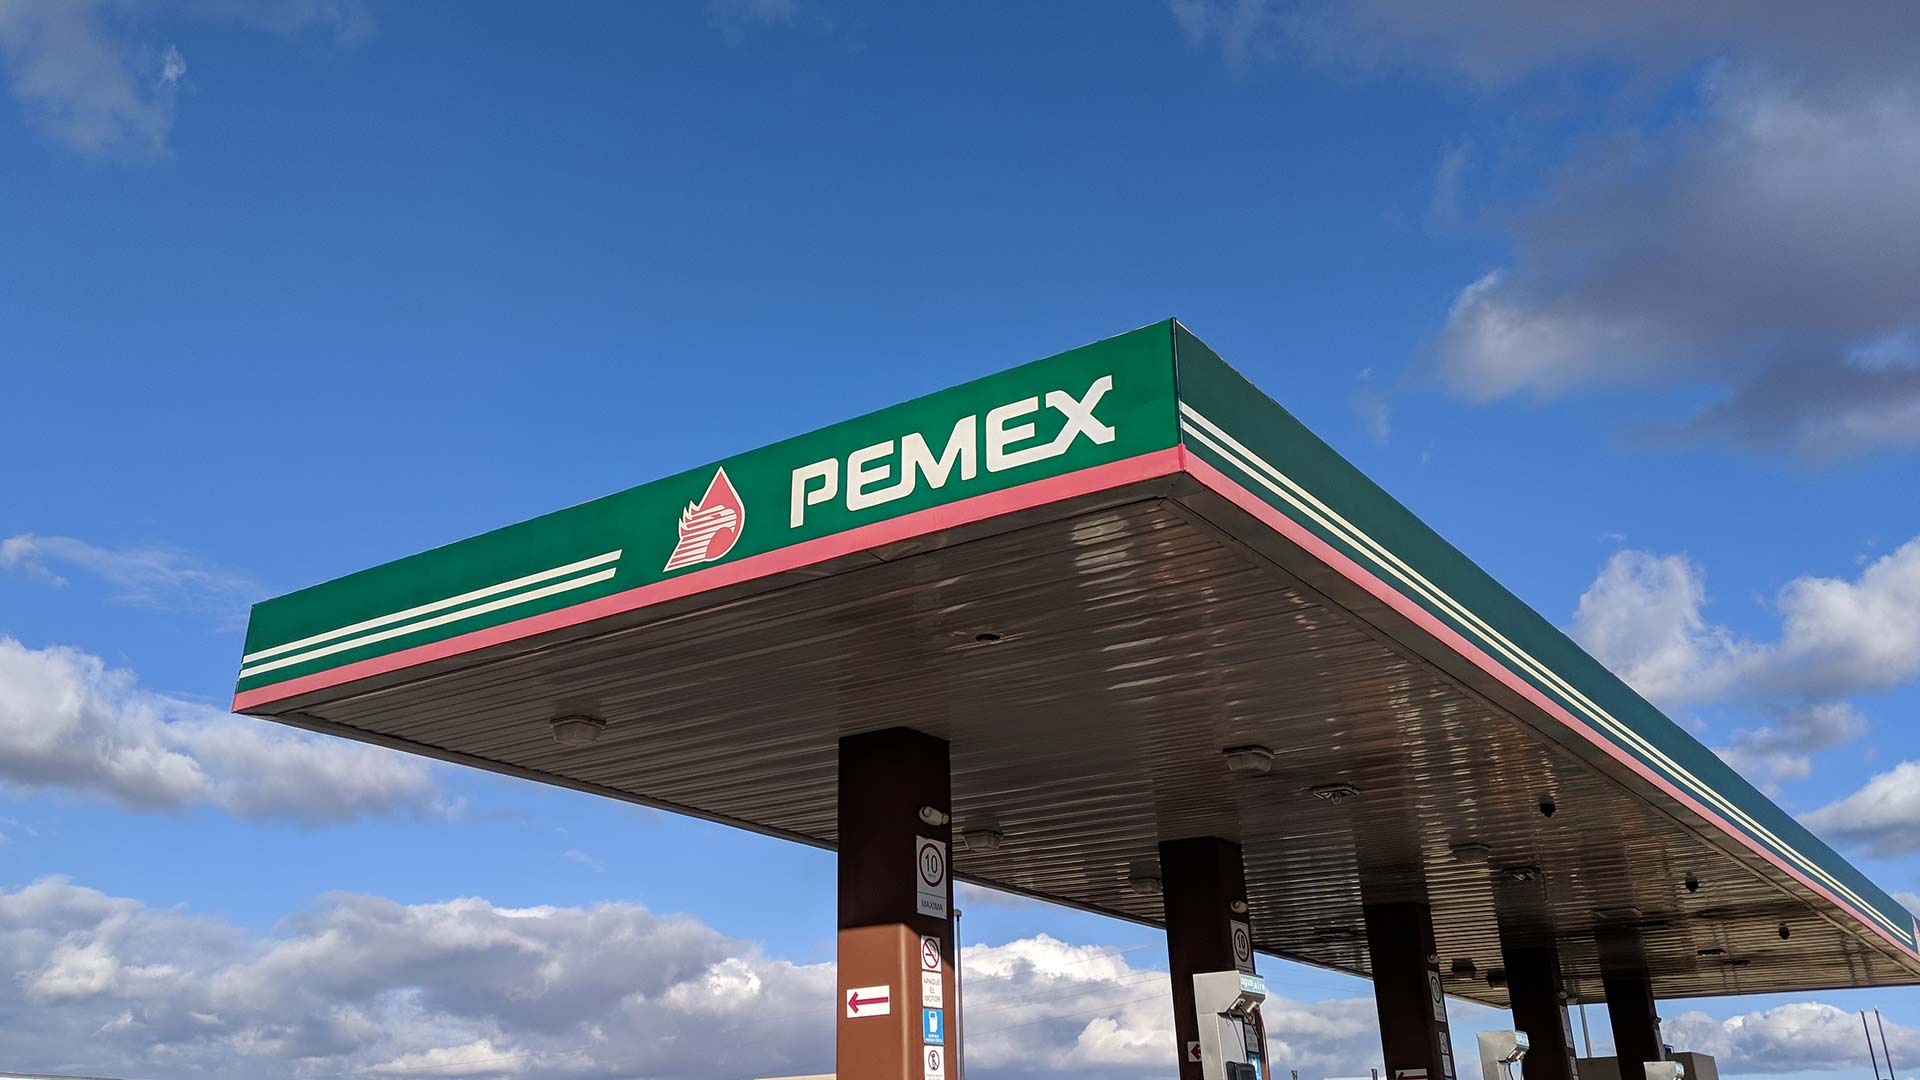 A Pemex gas station near the city of Nogales, Sonora.